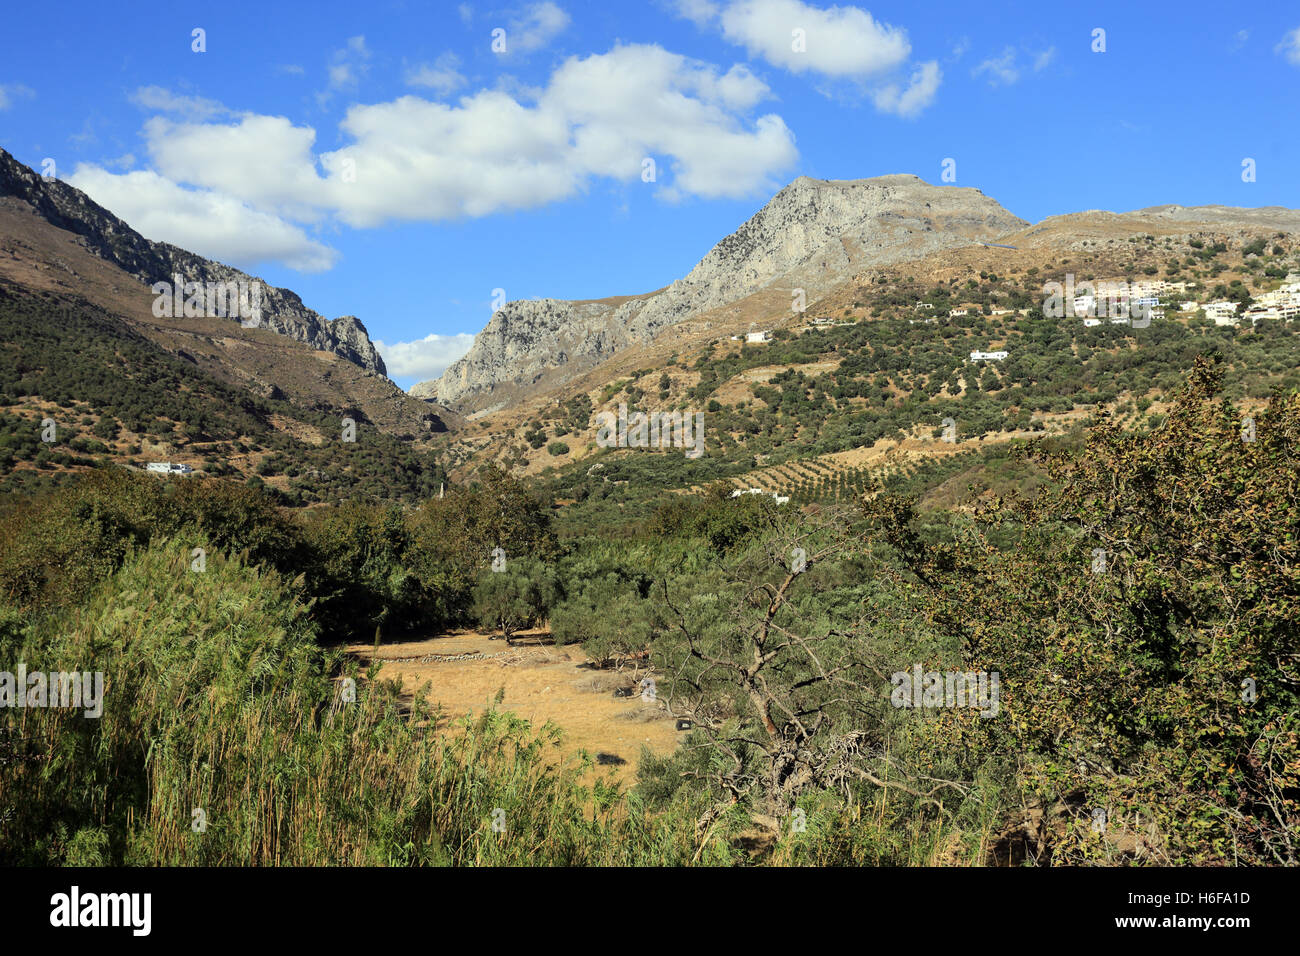 A view of the Kotsifou Gorge and village of Myrthios on Crete, Greece, from the southern resort village of Plakias. Stock Photo